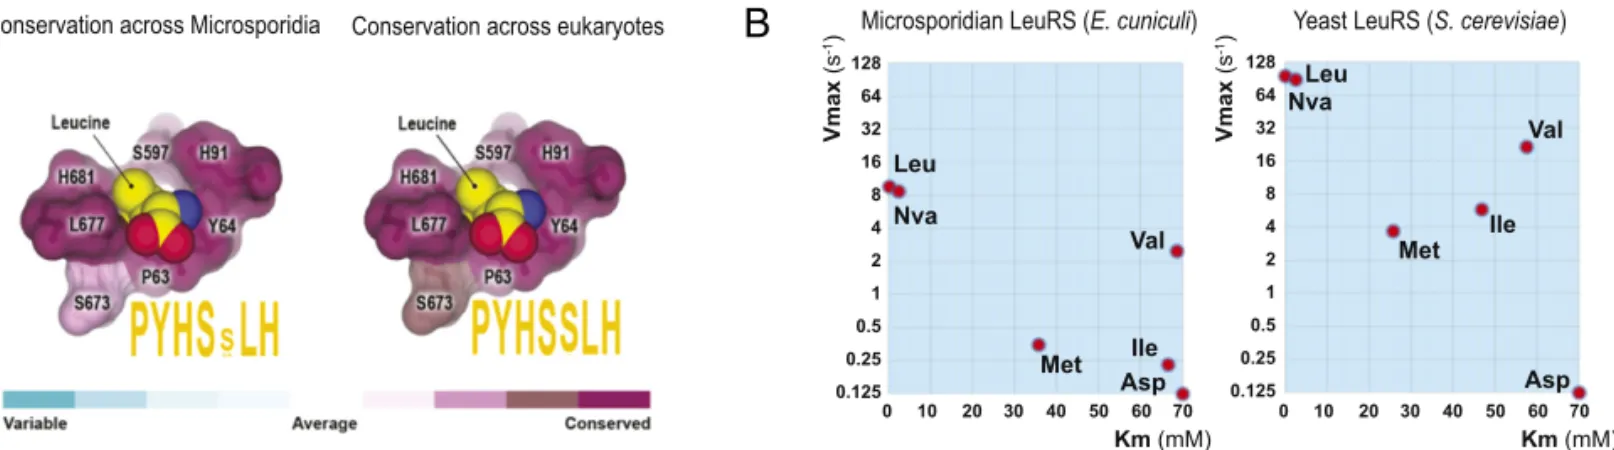 Fig. 3. Microsporidian LeuRS is promiscuous toward near-cognate substrates. (A) The panel shows a fragment of the LeuRS synthetase crystal structure (Protein Data Bank ID code 1WKB) to illustrate high conservation of the leucine-binding pocket in the LeuRS